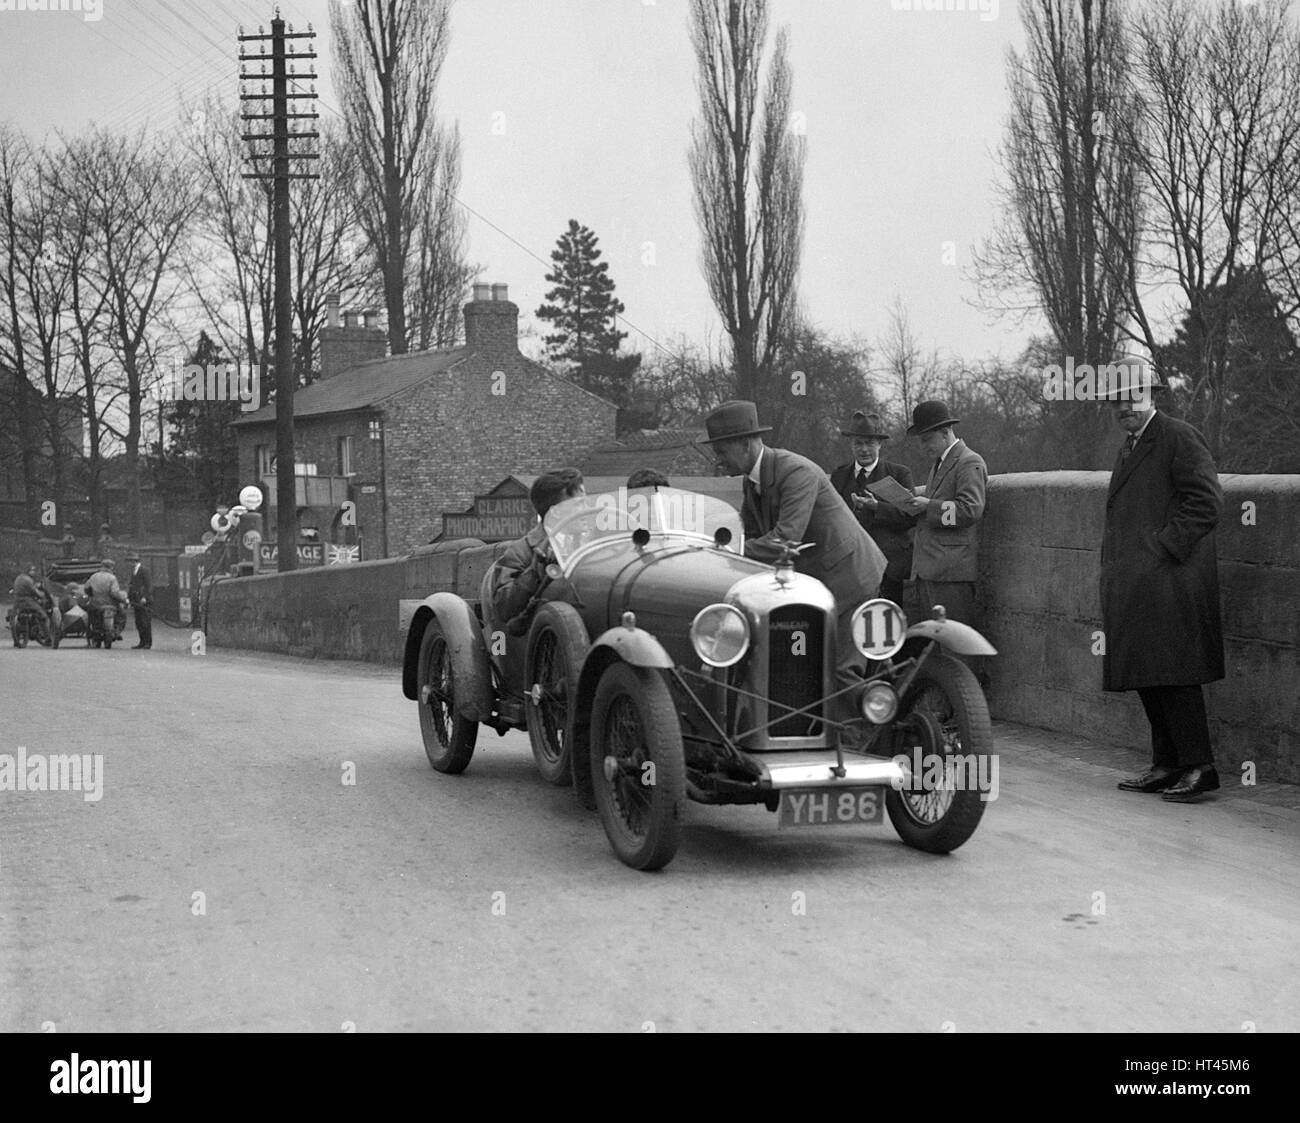 Amilcar Standard Sports at the Ilkley & District Motor Club Trial, Thirsk, Yorkshire, 1930s. Artist: Bill Brunell. Stock Photo